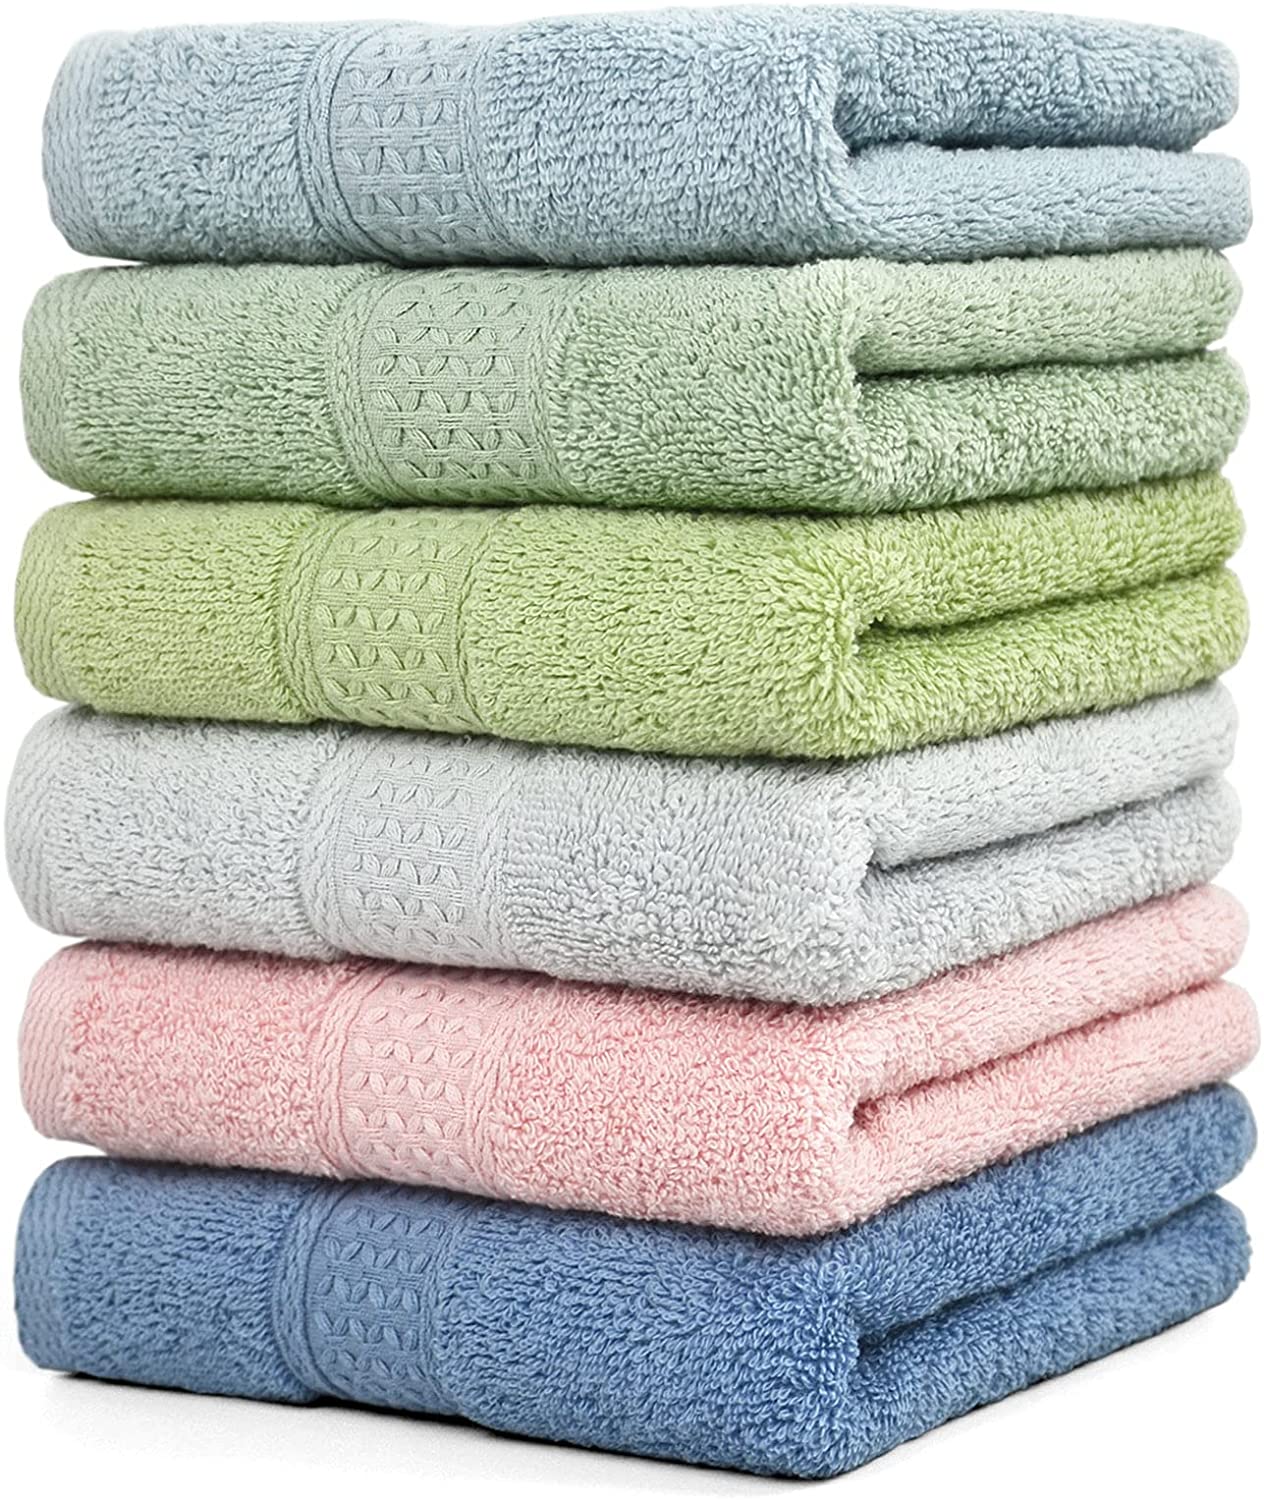 Cleanbear Hand Towels for Bathroom Cotton Hand Towel Set of 6 Ultra Soft  and Hig